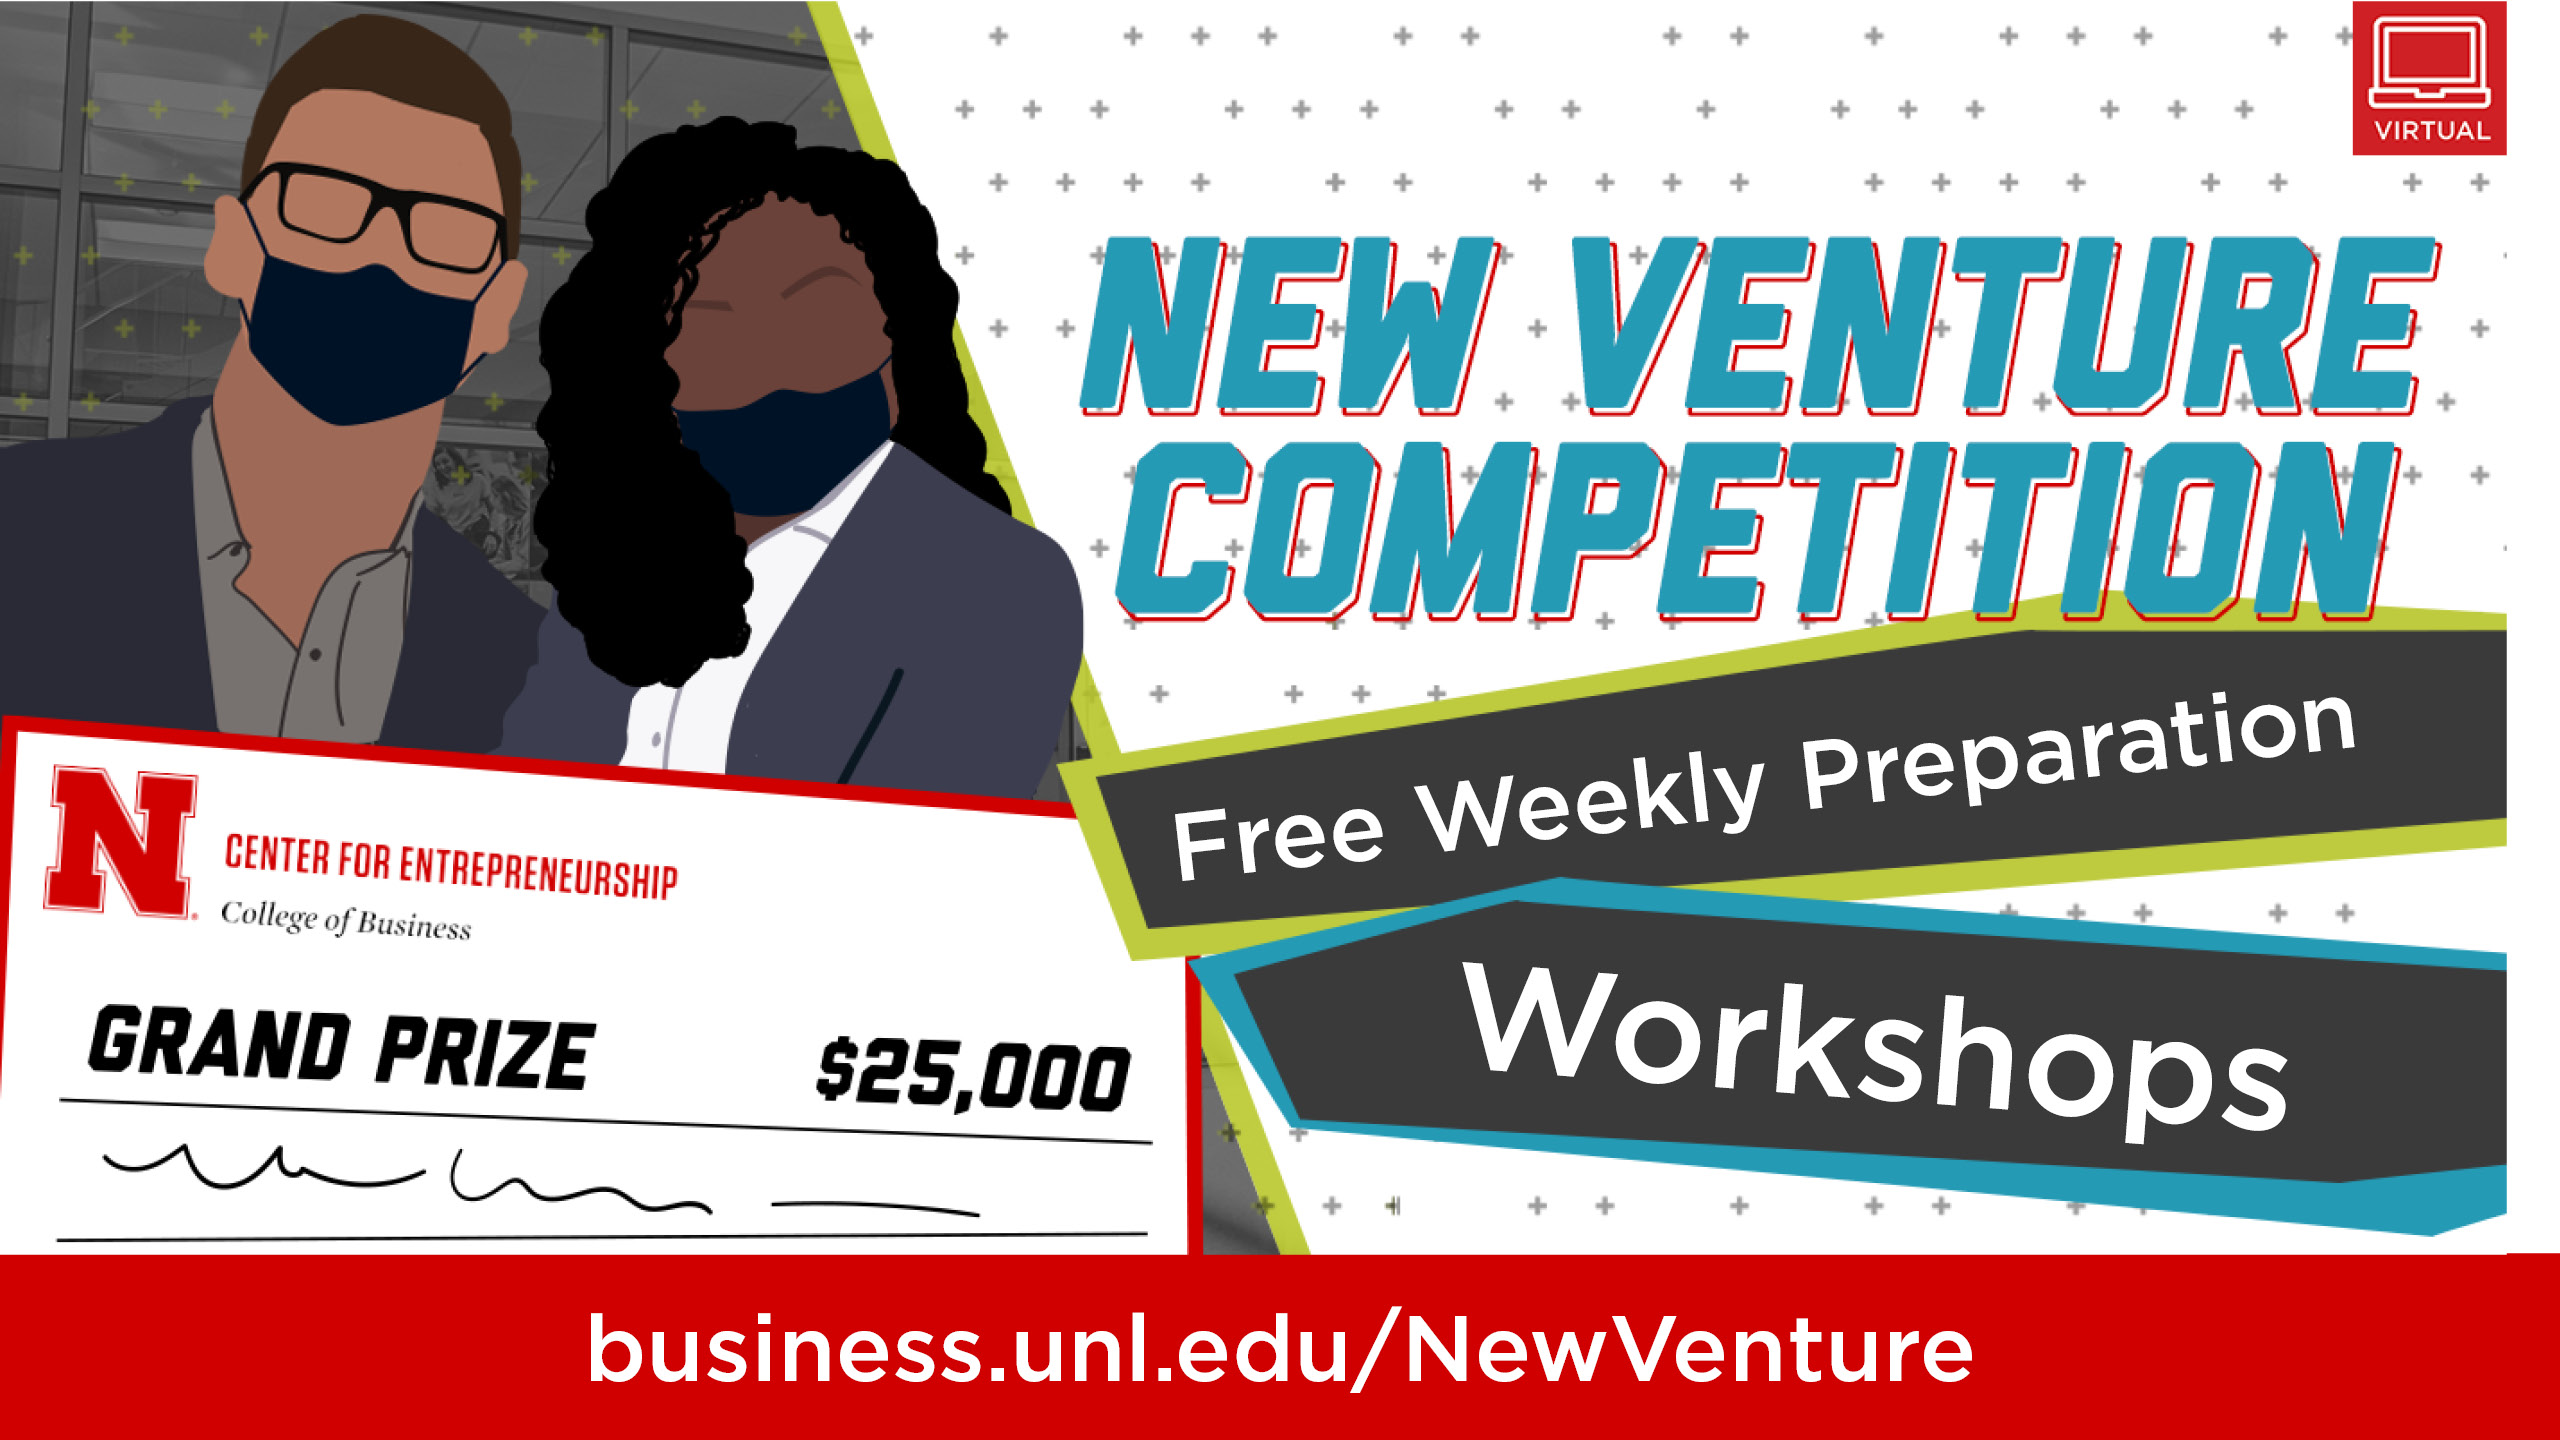 Attend any of the free preparation workshops to sharpen your pitch for $25,000.